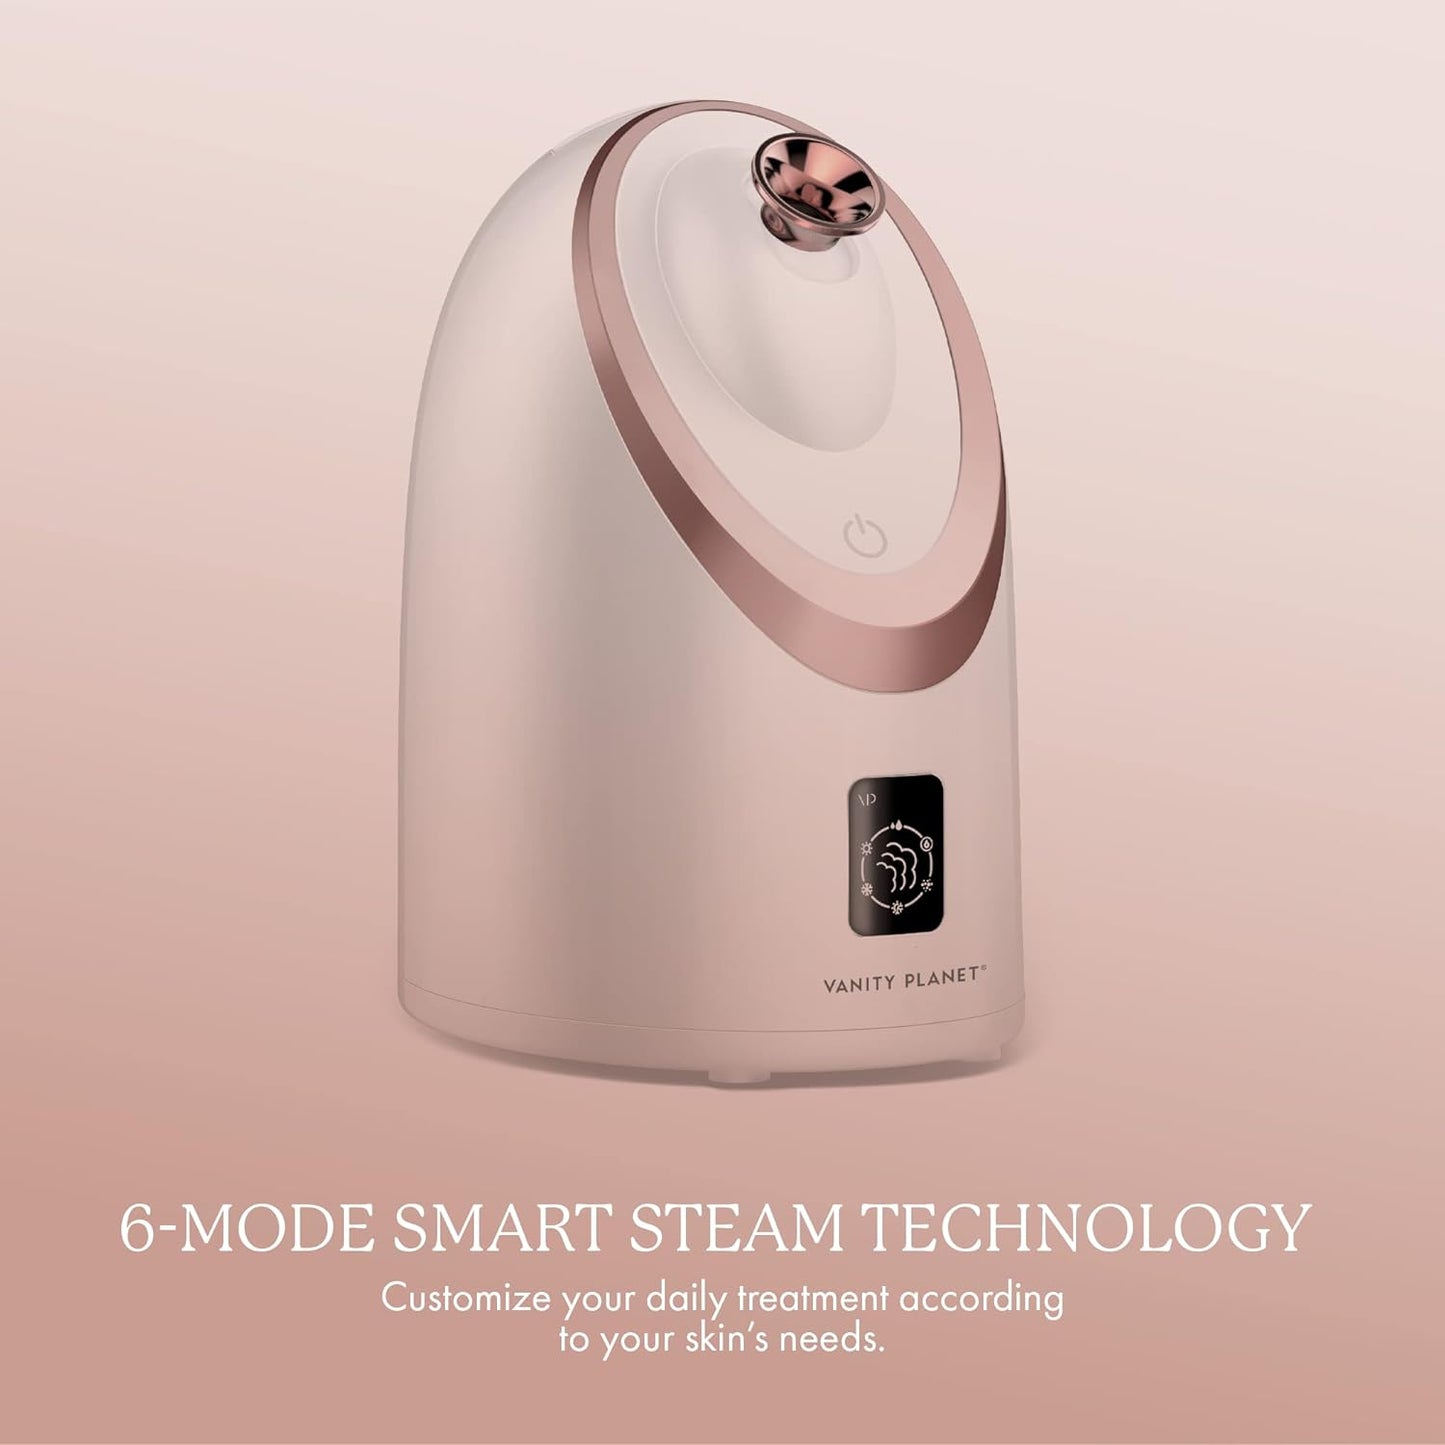 Senia Hot and Cold Facial Steamer by Vanity Planet - Detoxifying Aromatherapy Facial Steamer with Smart Steam Technology - Unclog Pores & Blackheads Cleaner Detoxifies, Cleanses & Moisturizes Skin